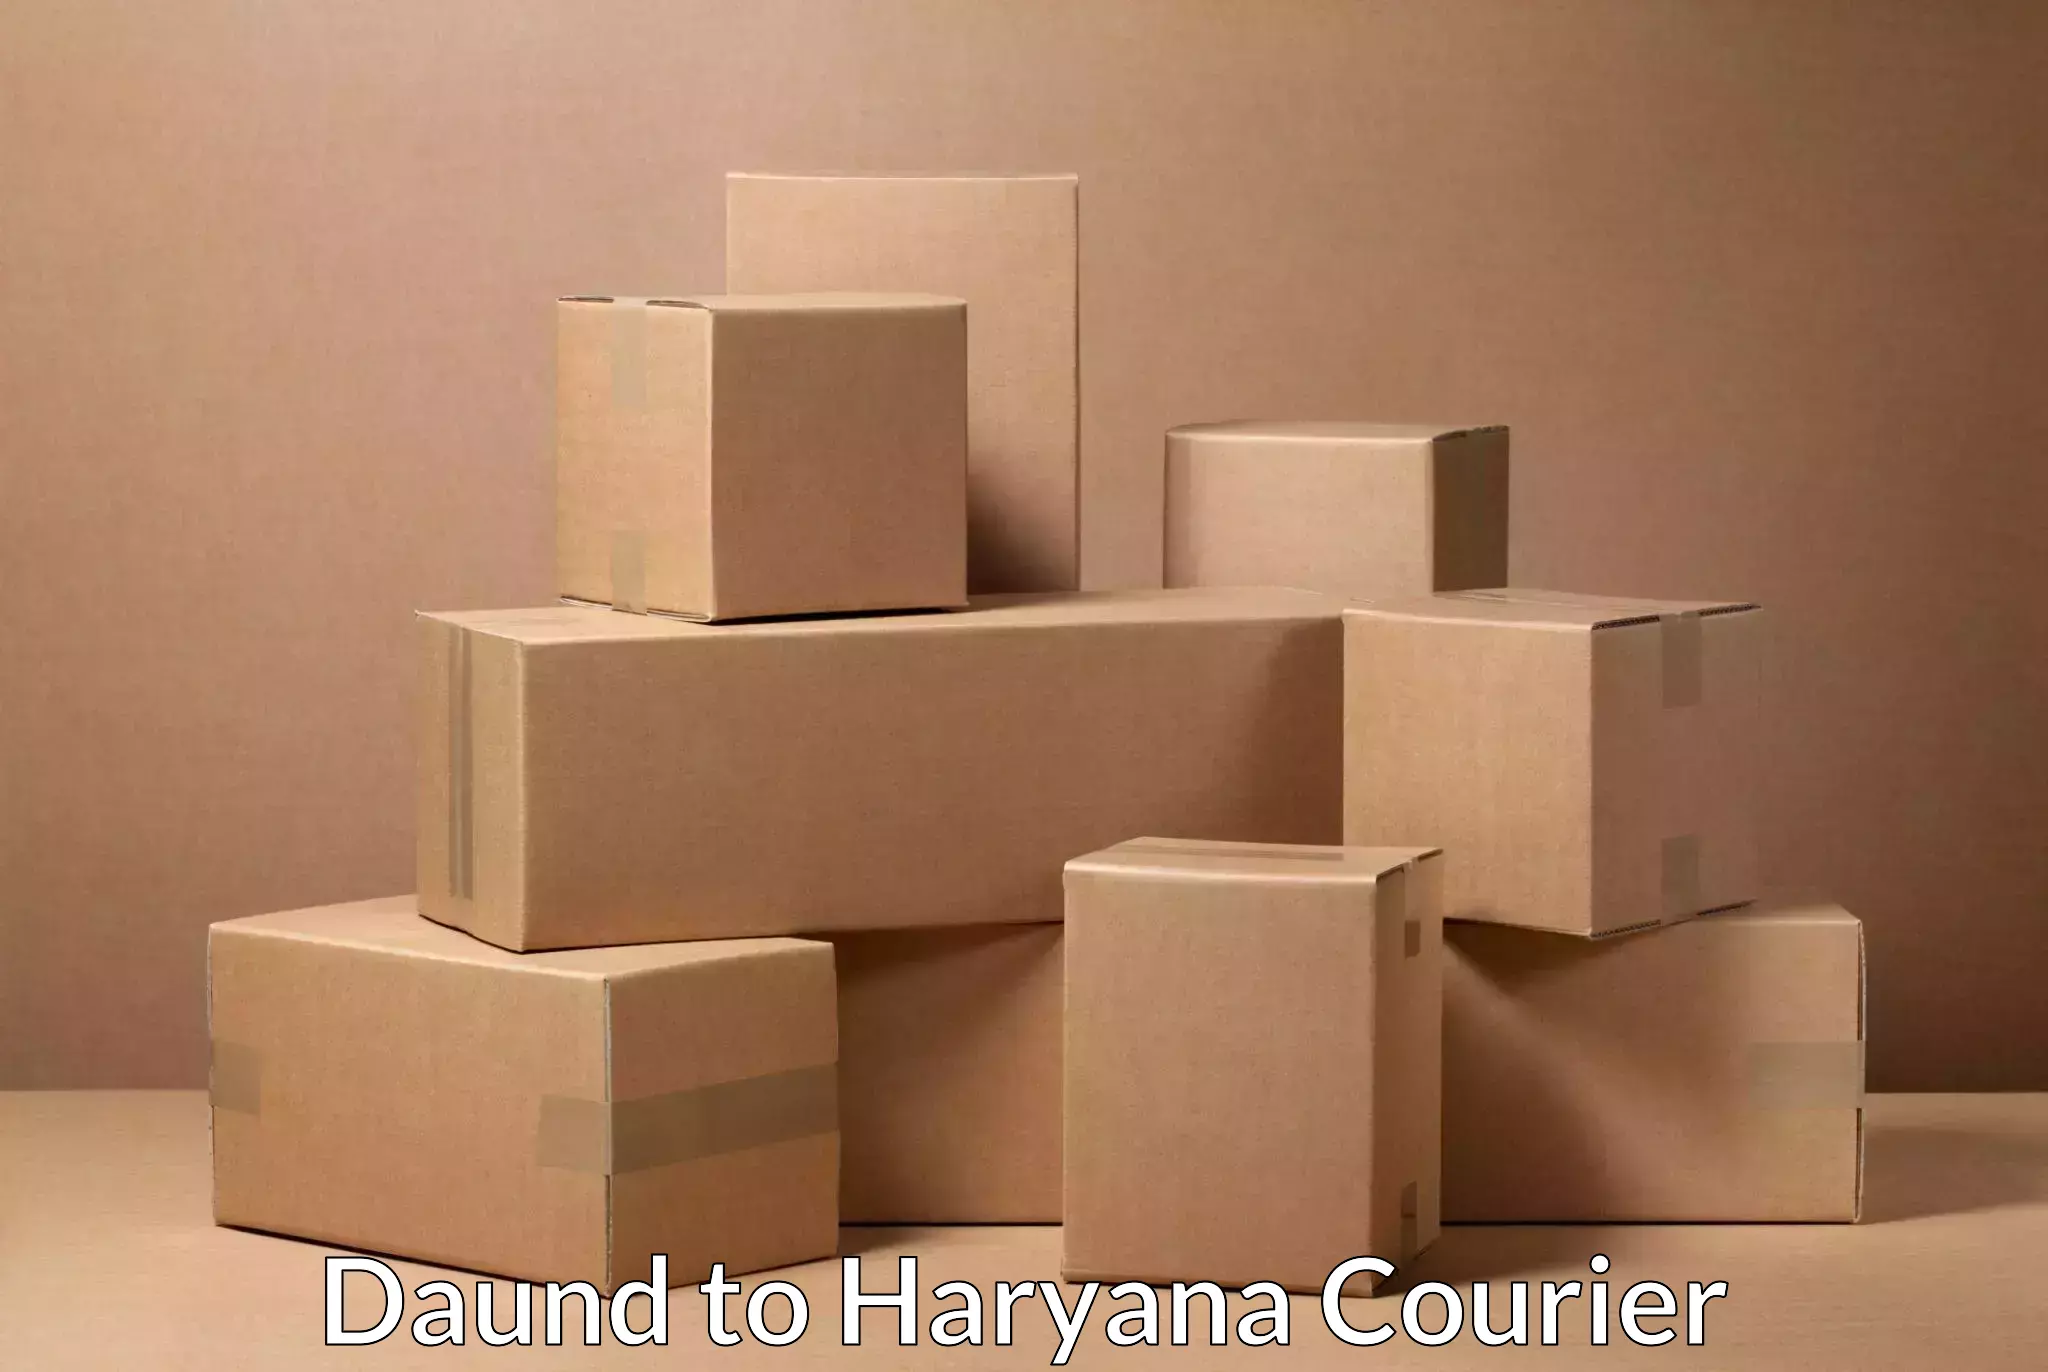 Global courier networks Daund to Haryana